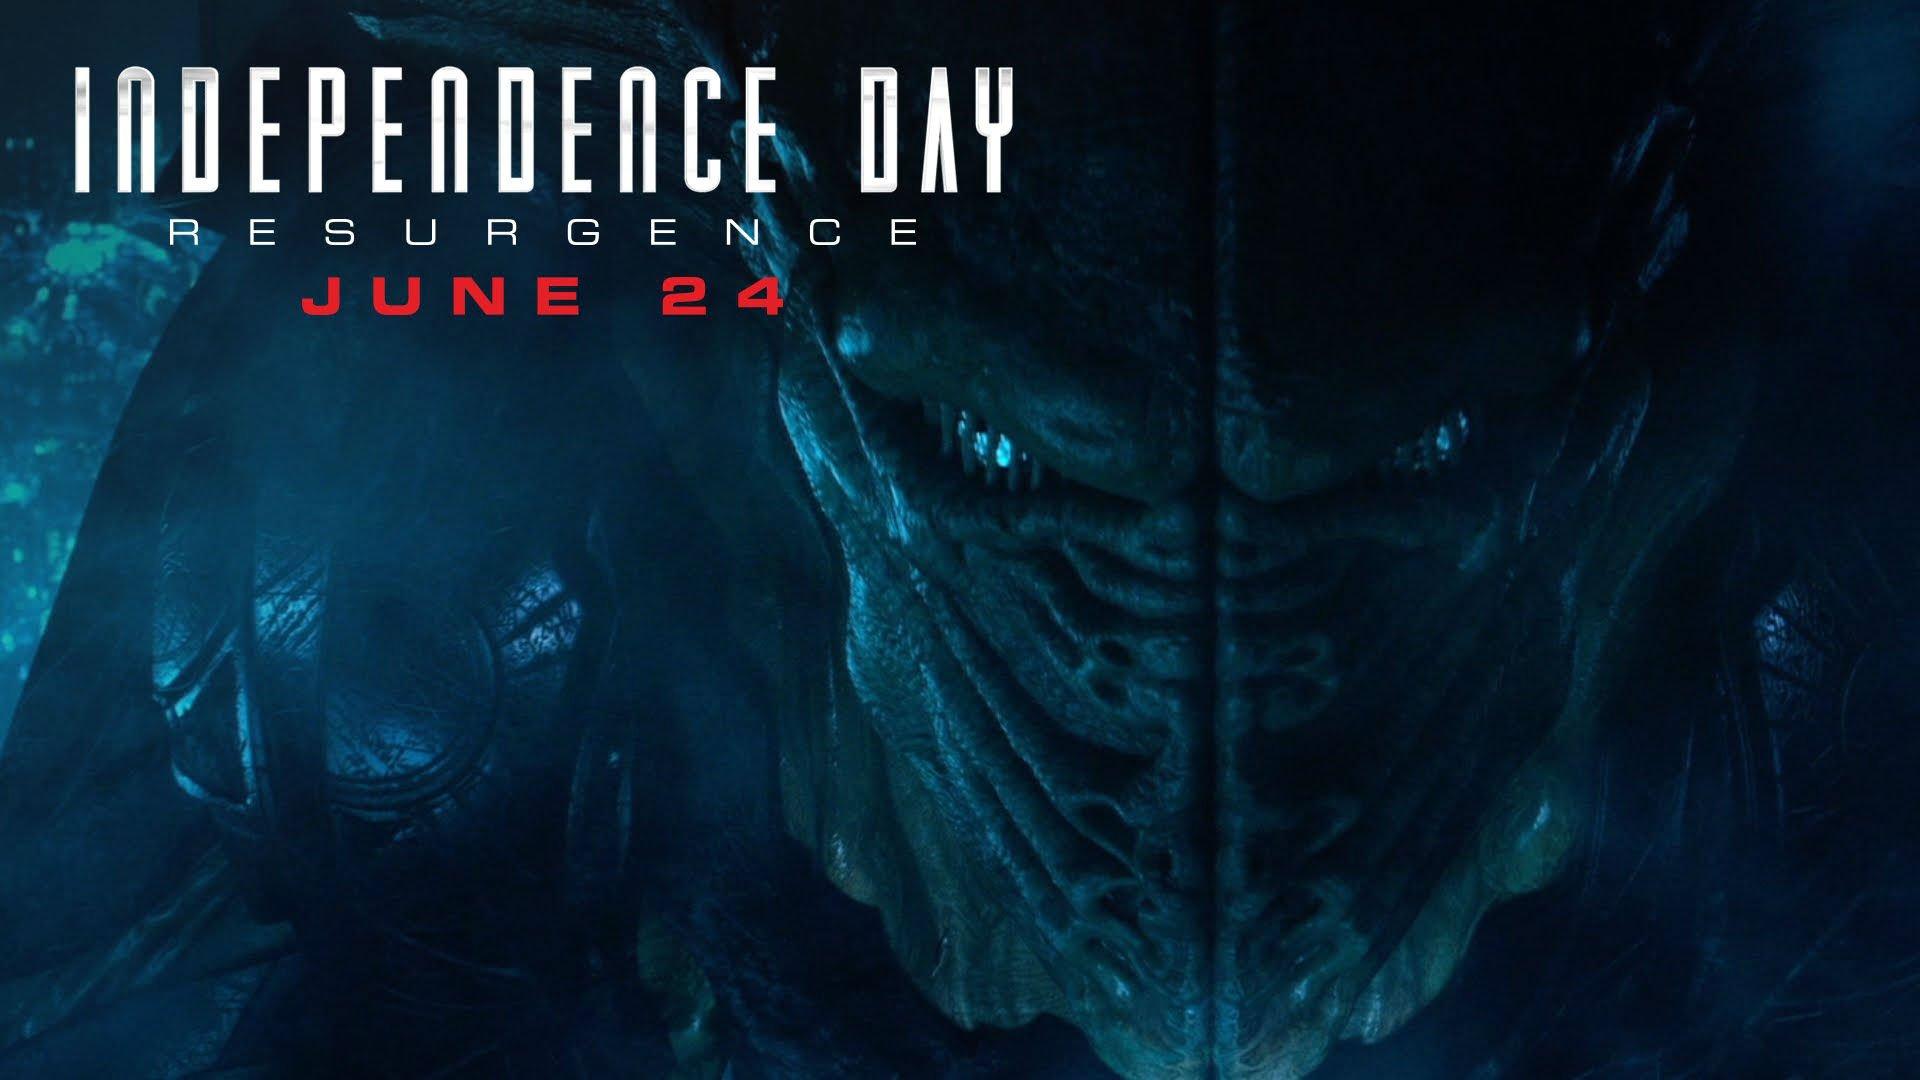 poster, Independence, Day, Resurgence, Sci fi, Futuristic, Action, Thriller, Alien, Aliens, Adventure, Space, Spaceship Wallpaper HD / Desktop and Mobile Background